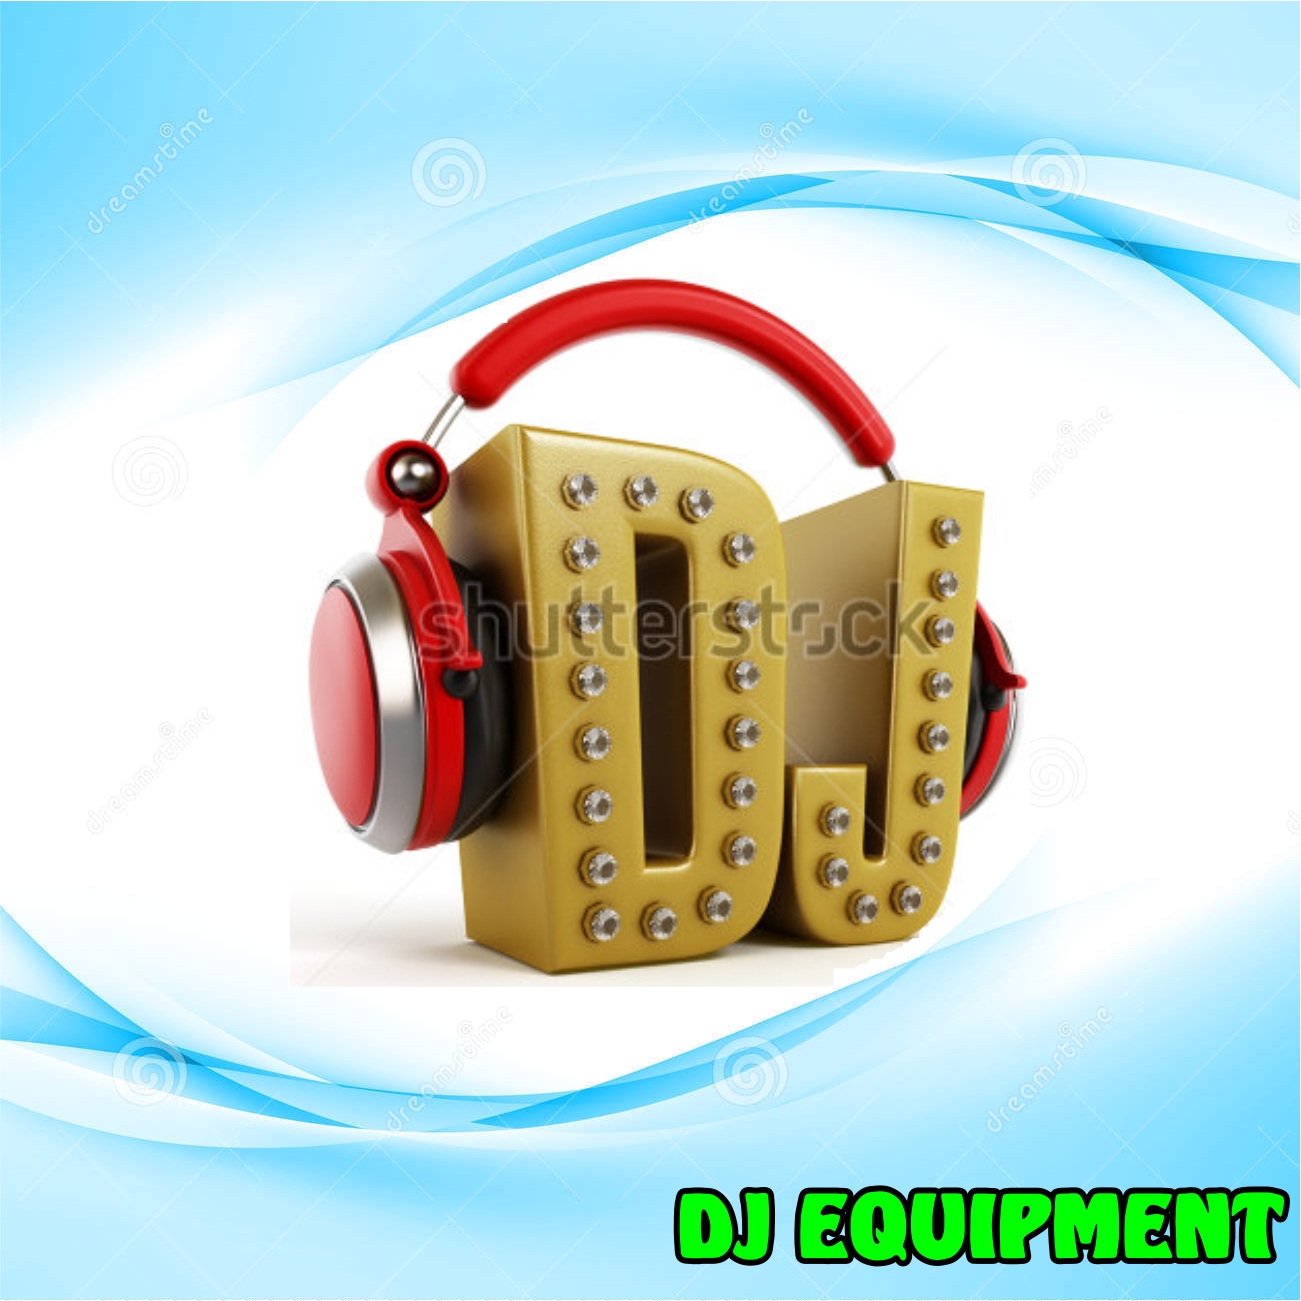 CLICK ME  DJ EQUIPMENT DISCO SOUND AUDIO GRAVITY DJ STORE 0315072463 DJ SOUND AUDIO EQUIPMENT FOR SALE CHEAPEST DEAL IN ALL PIONEER DJ EQUIPMENT IN DURBAN GRAVITY SOUND AND LIGHTINNG WAREHOUSE 0315072736